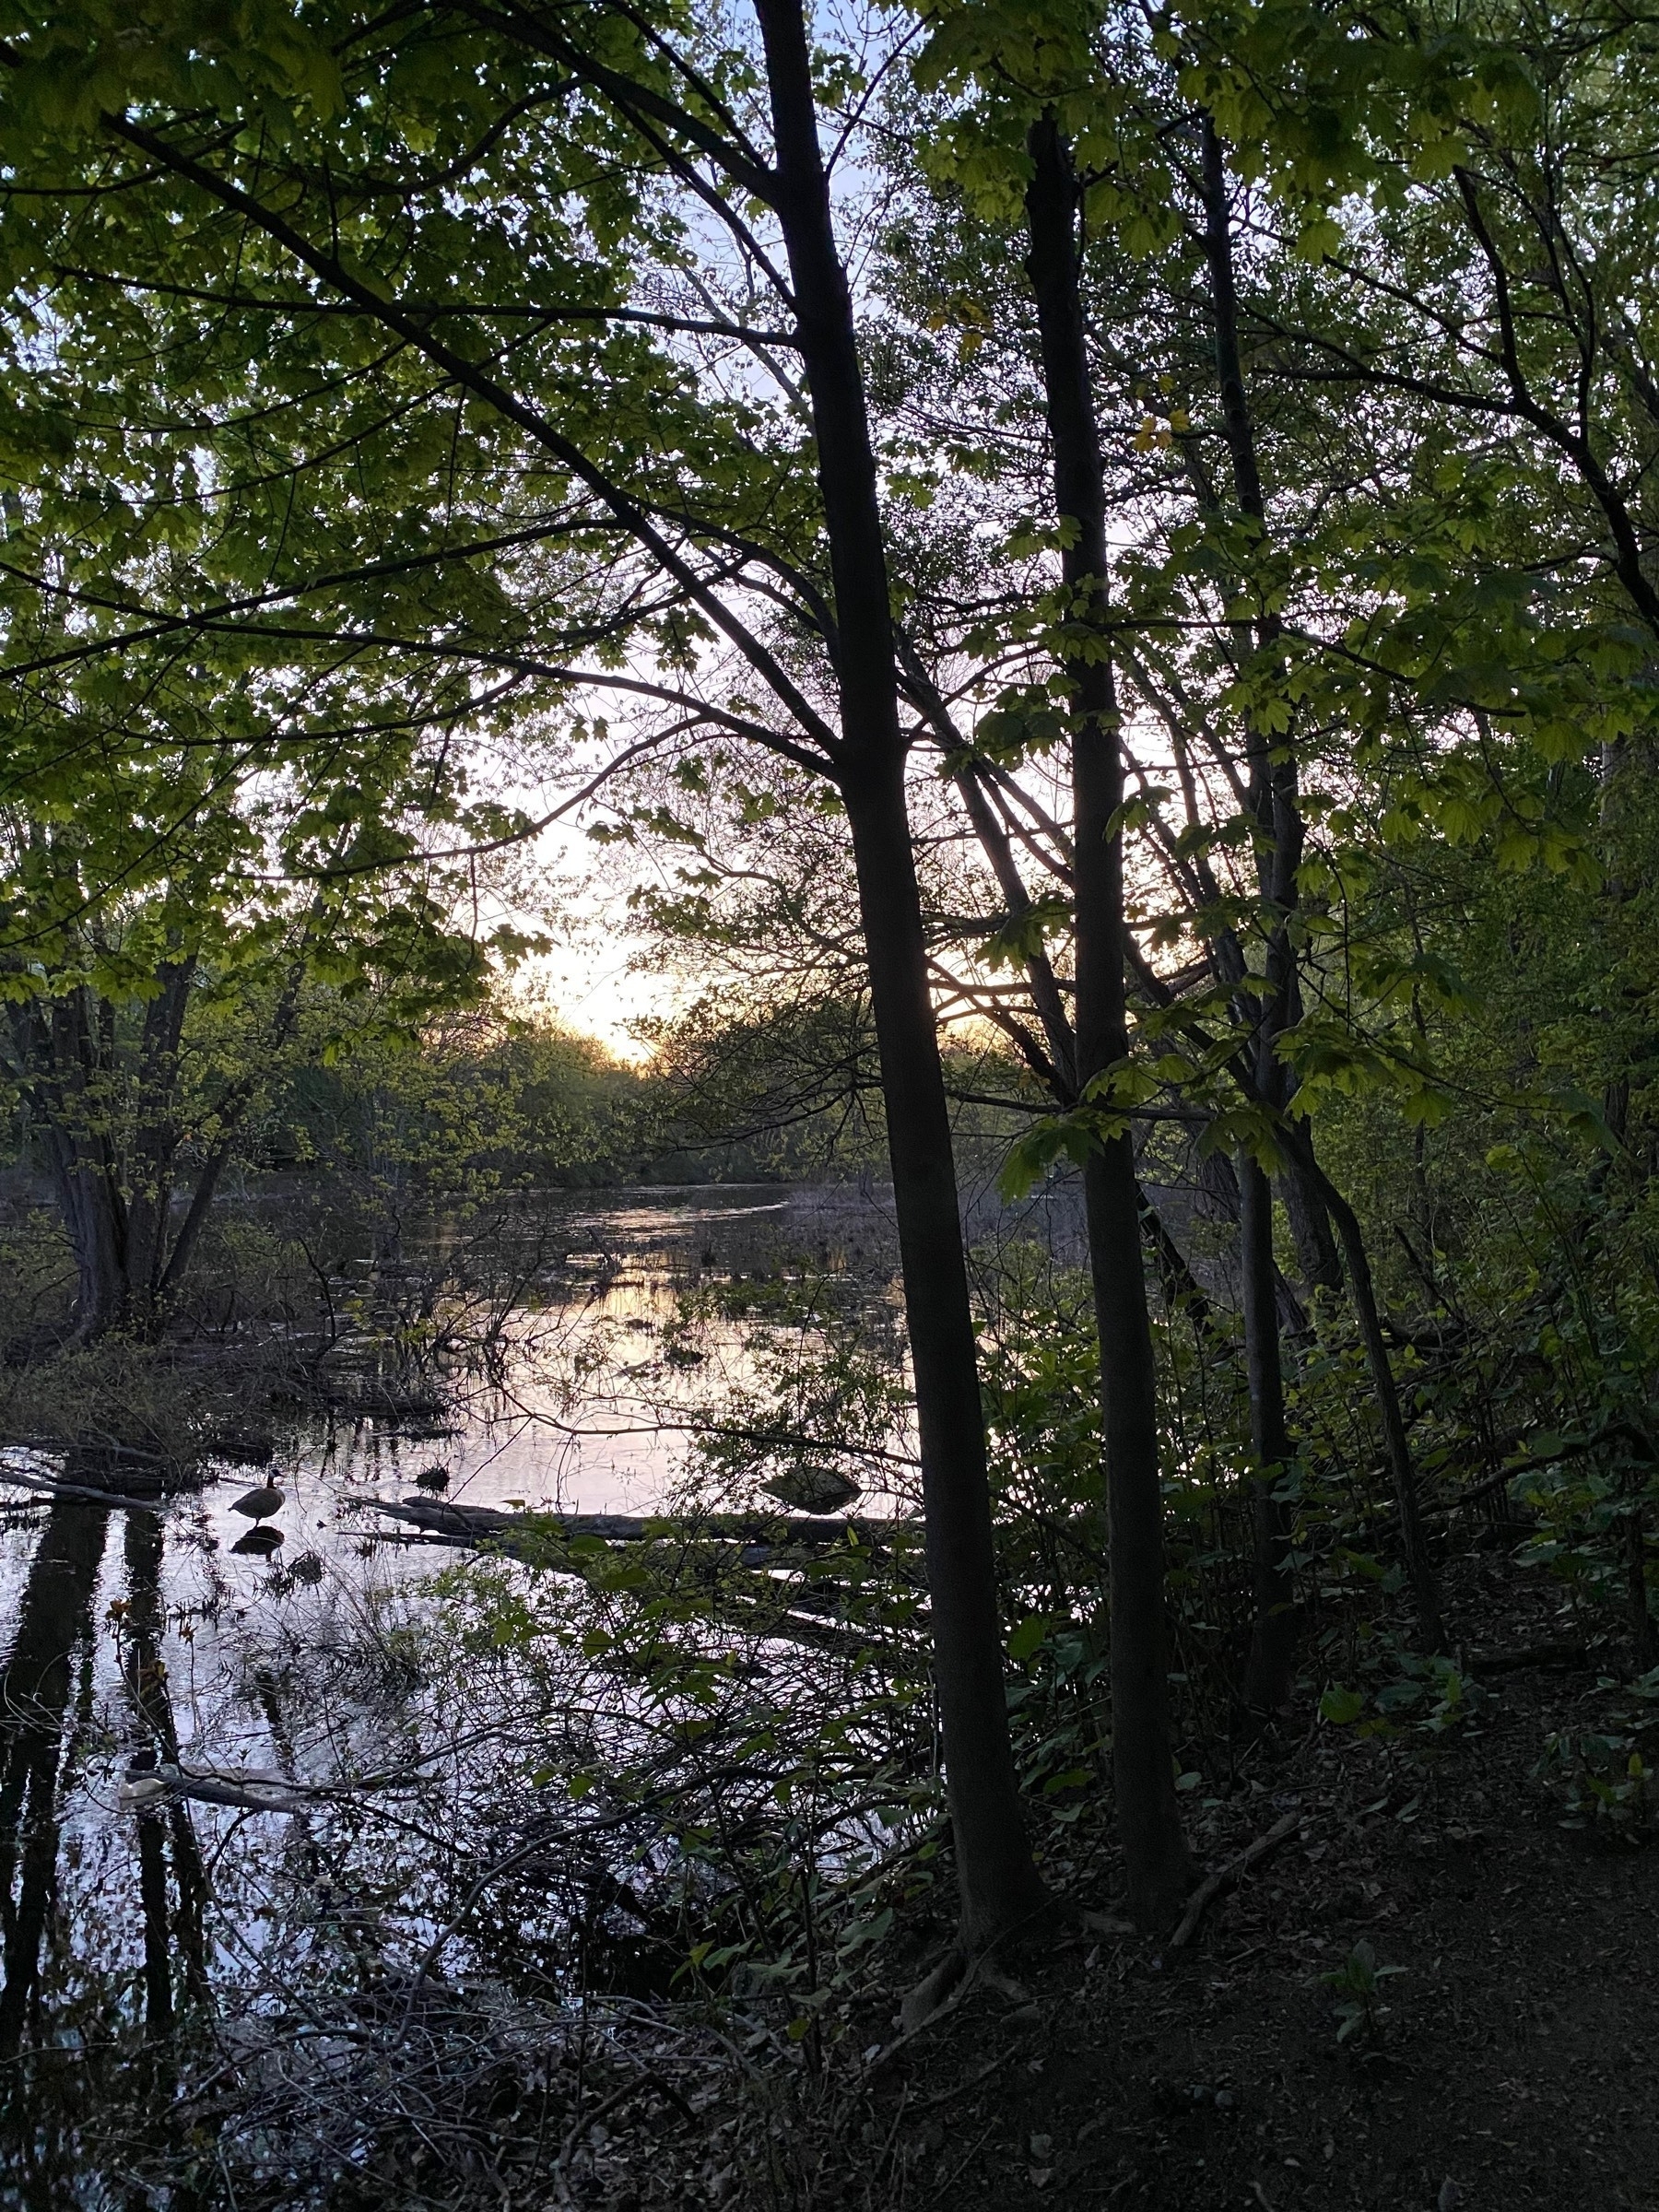 Twilight view of a small river with a clear sky above, the sun just below the horizon, and fresh leaves on the trees lining the banks.